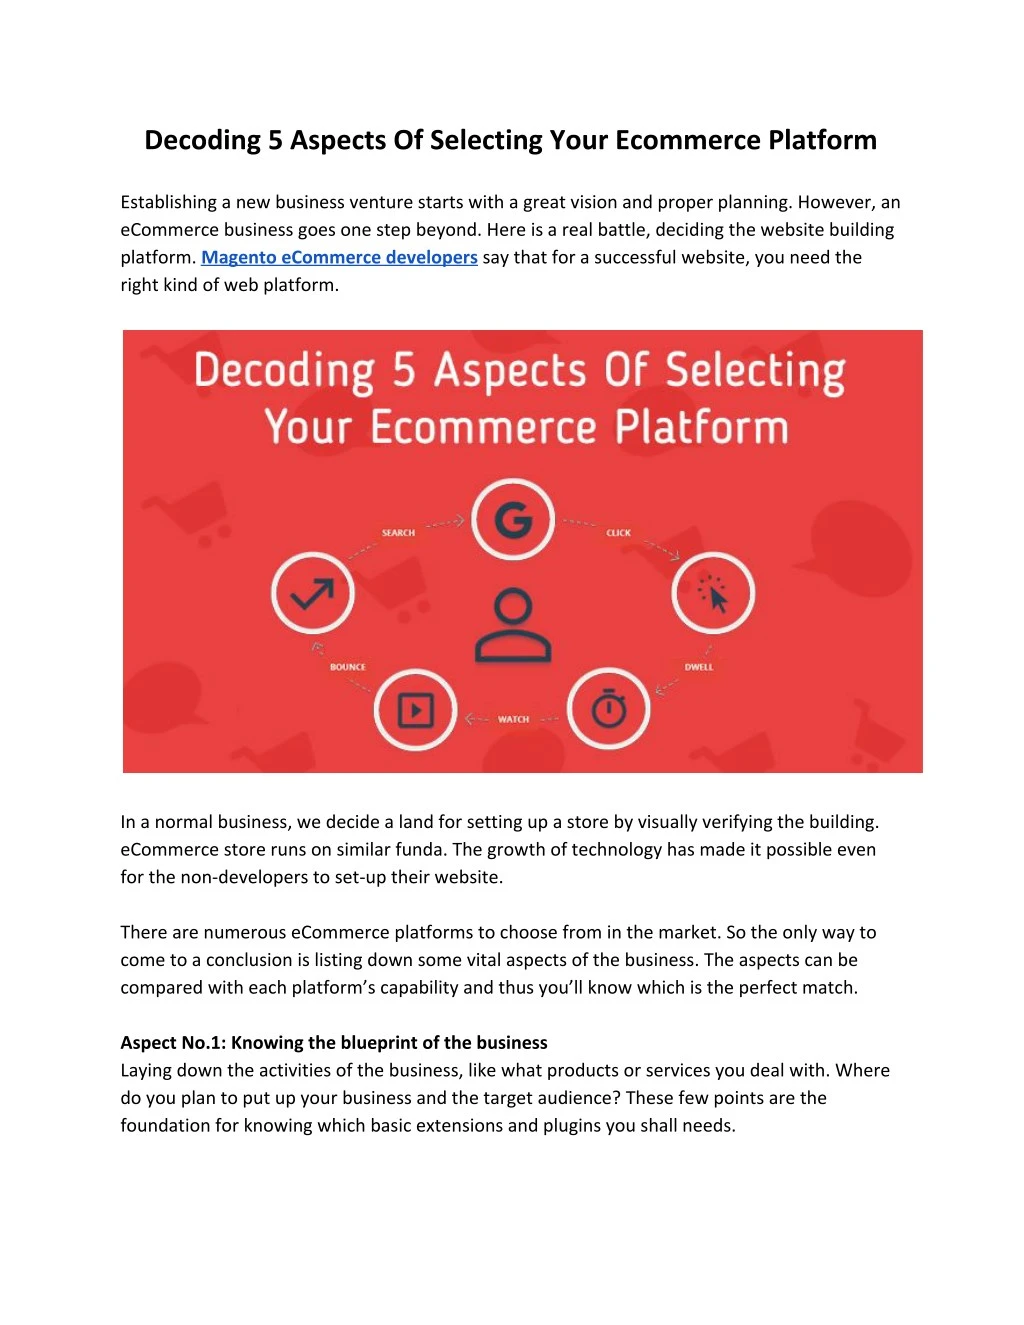 decoding 5 aspects of selecting your ecommerce